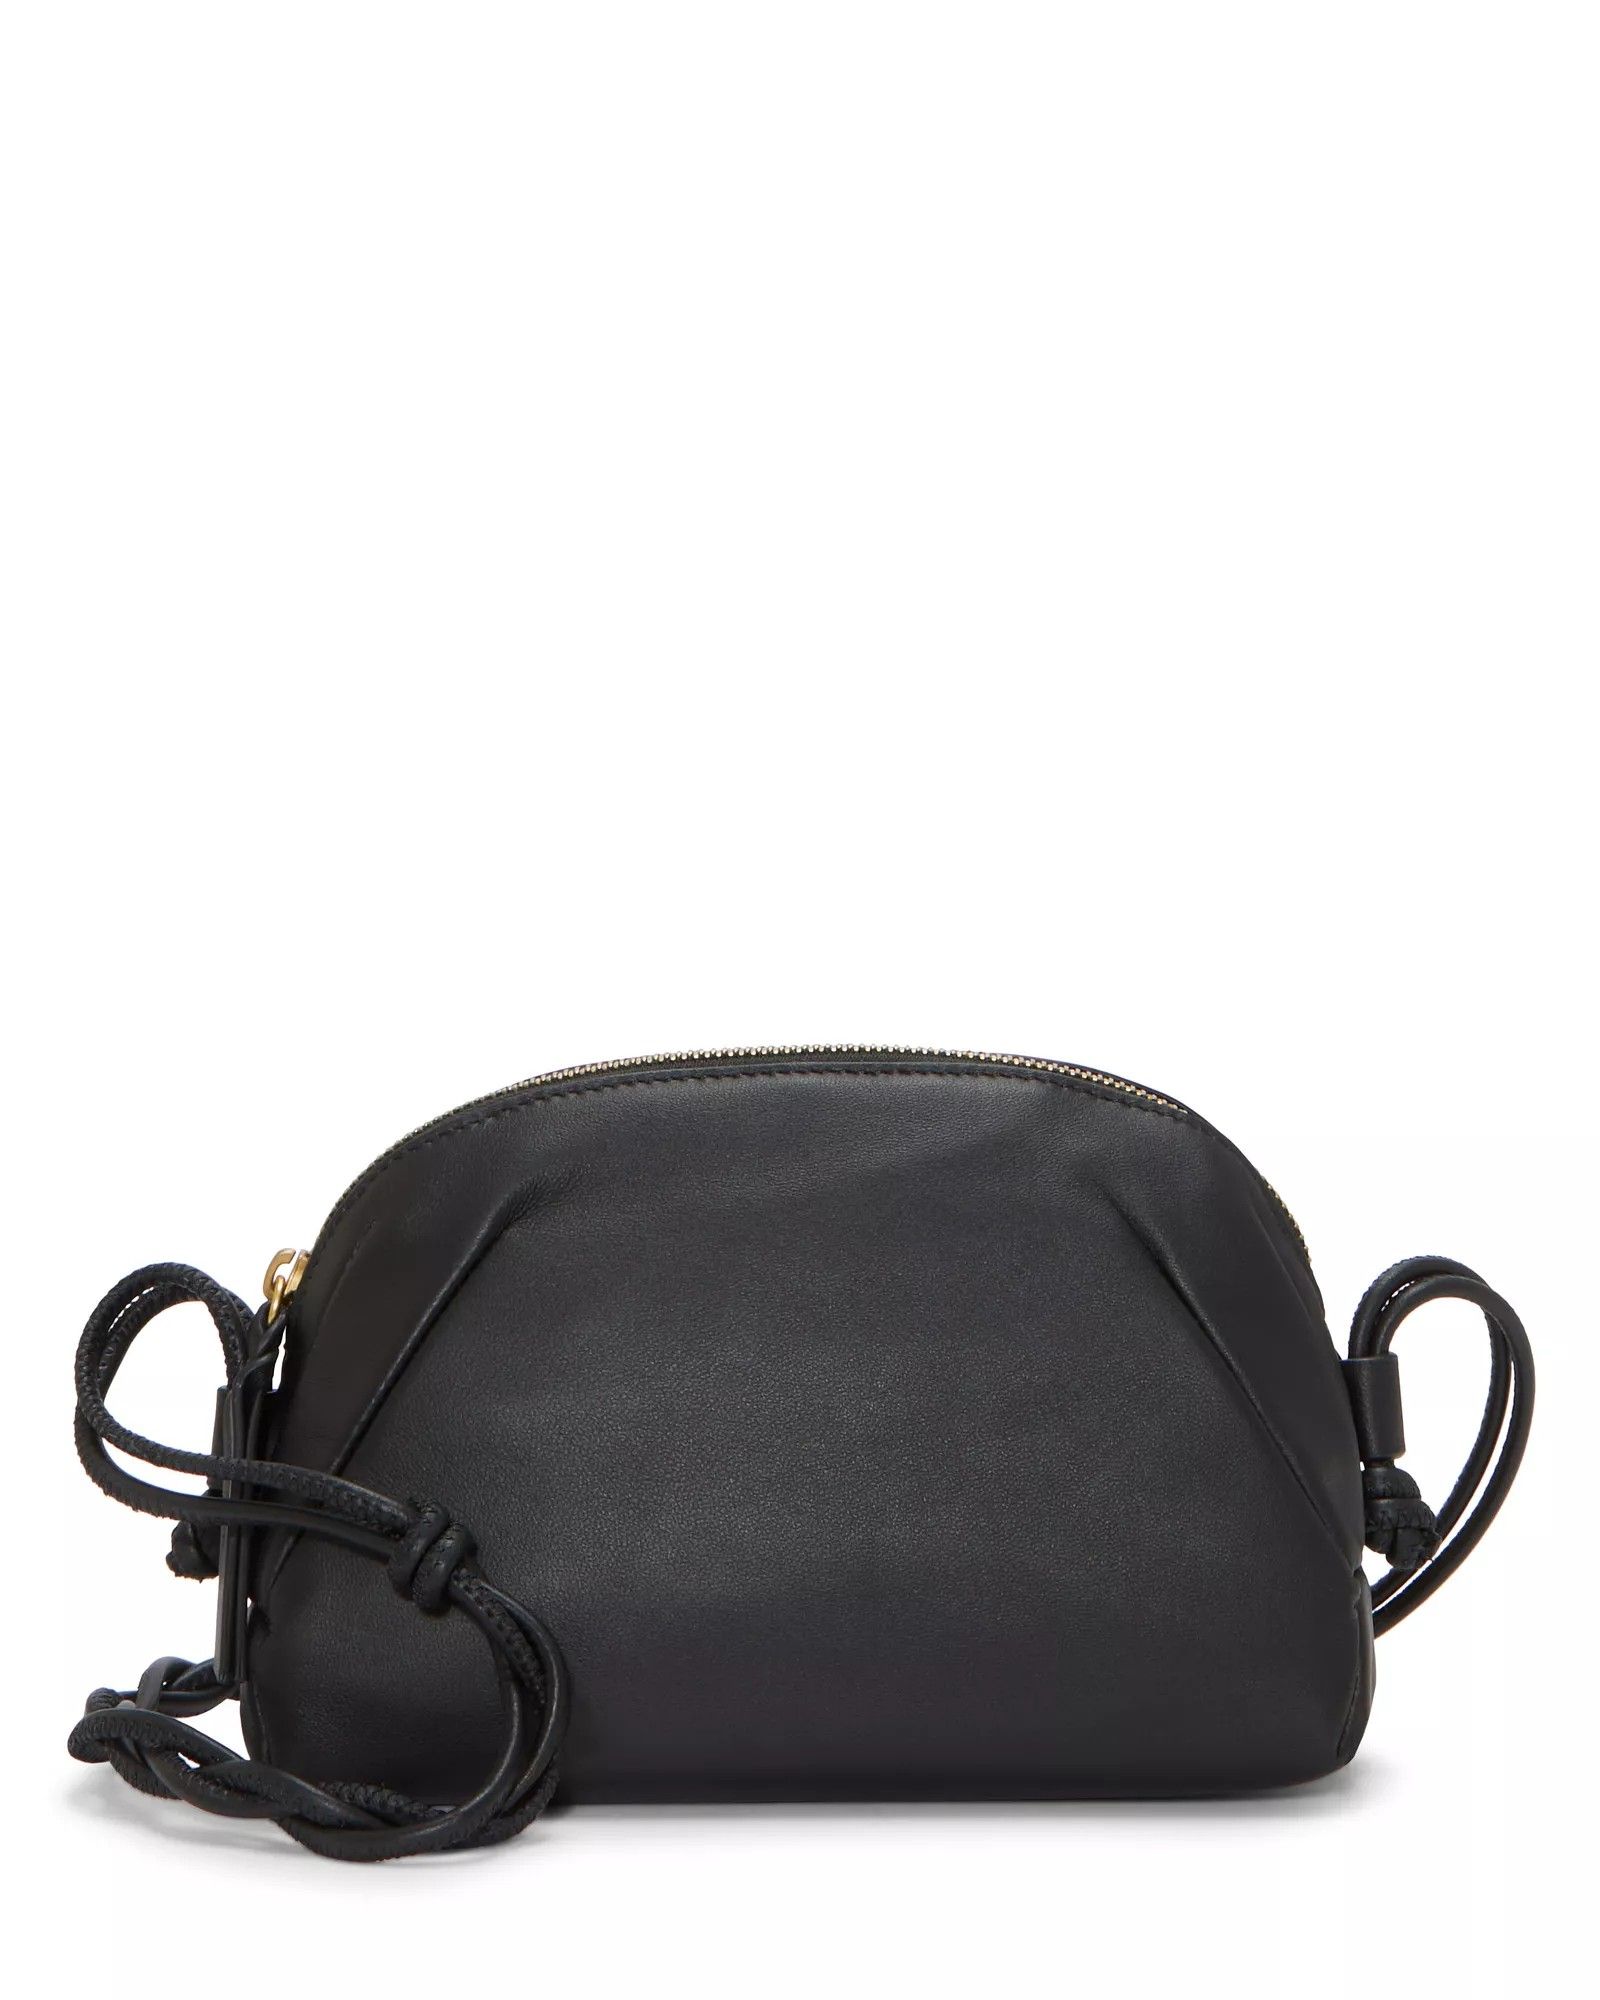 Vince Camuto Emmie Crossbody Bag | Vince Camuto